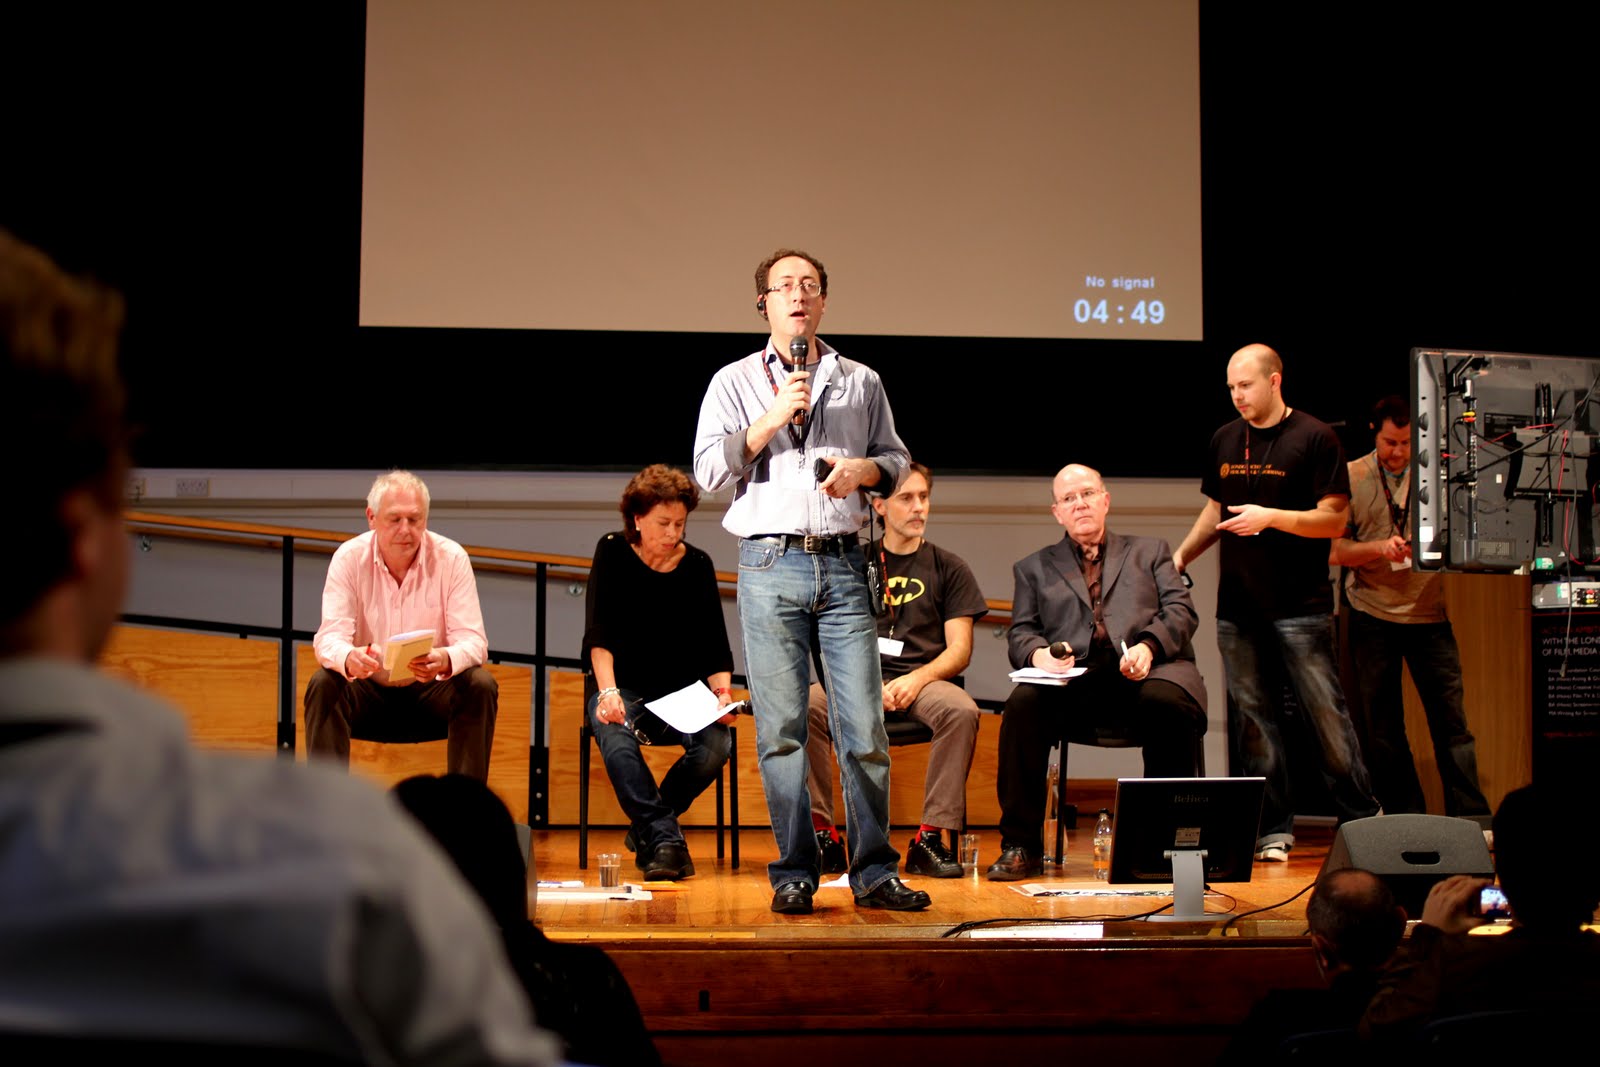 Speaking on Crime Writing at the 2010 London Screenwriters Festival - with Barbary Machin, Rick Drew and Andrew Taft. http://momentsoffilm.blogspot.com/2010/11/crime-pays-lswf.html